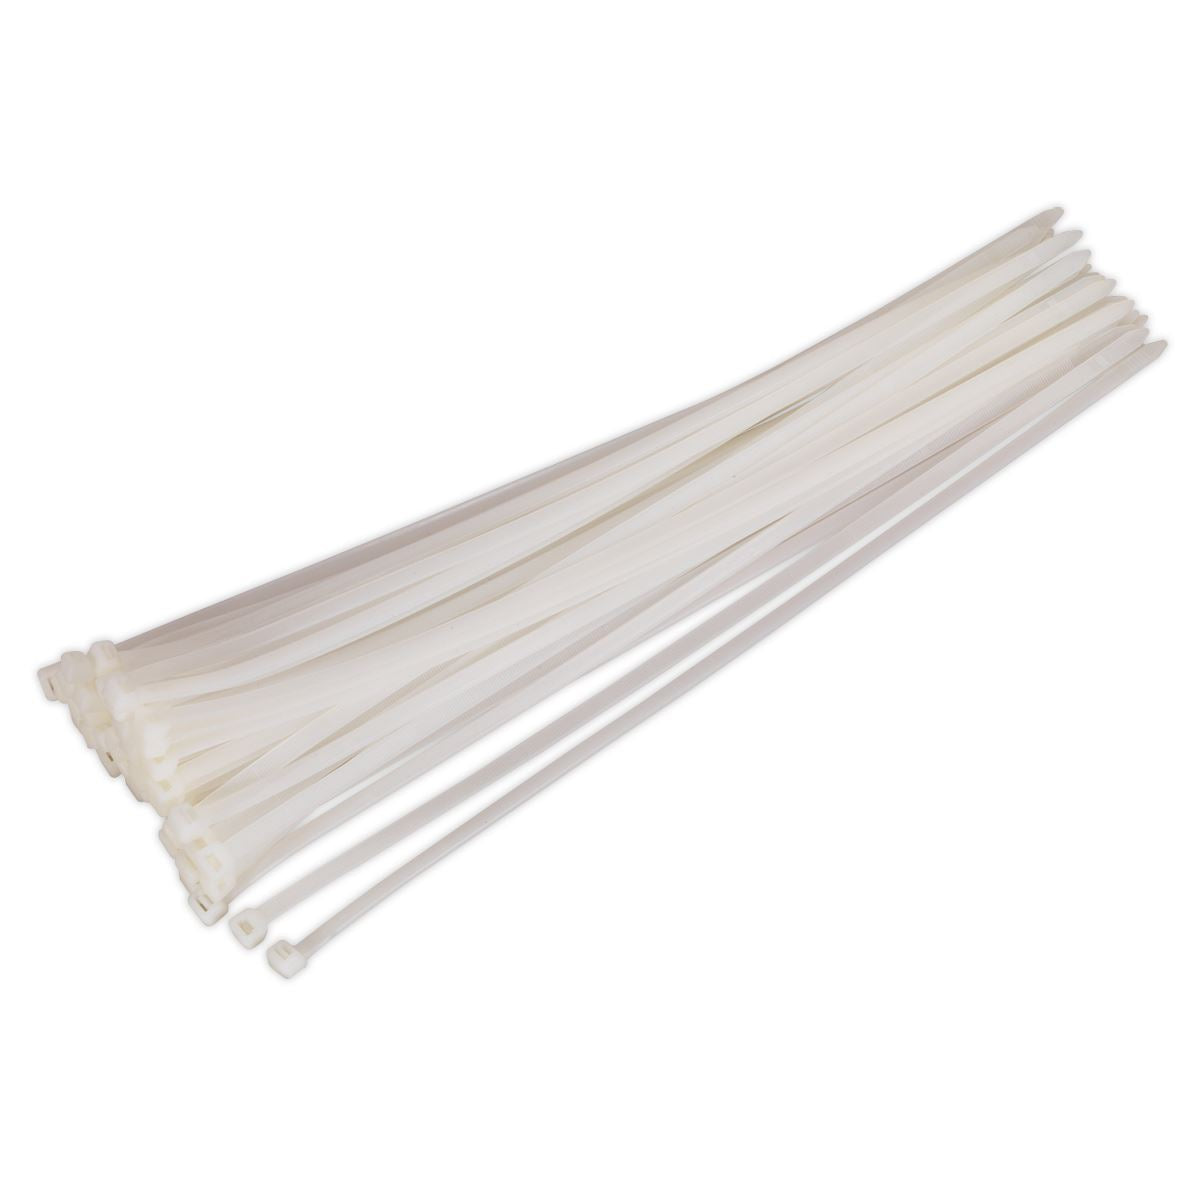 Sealey Cable Tie 450 x 7.6mm White Pack of 50